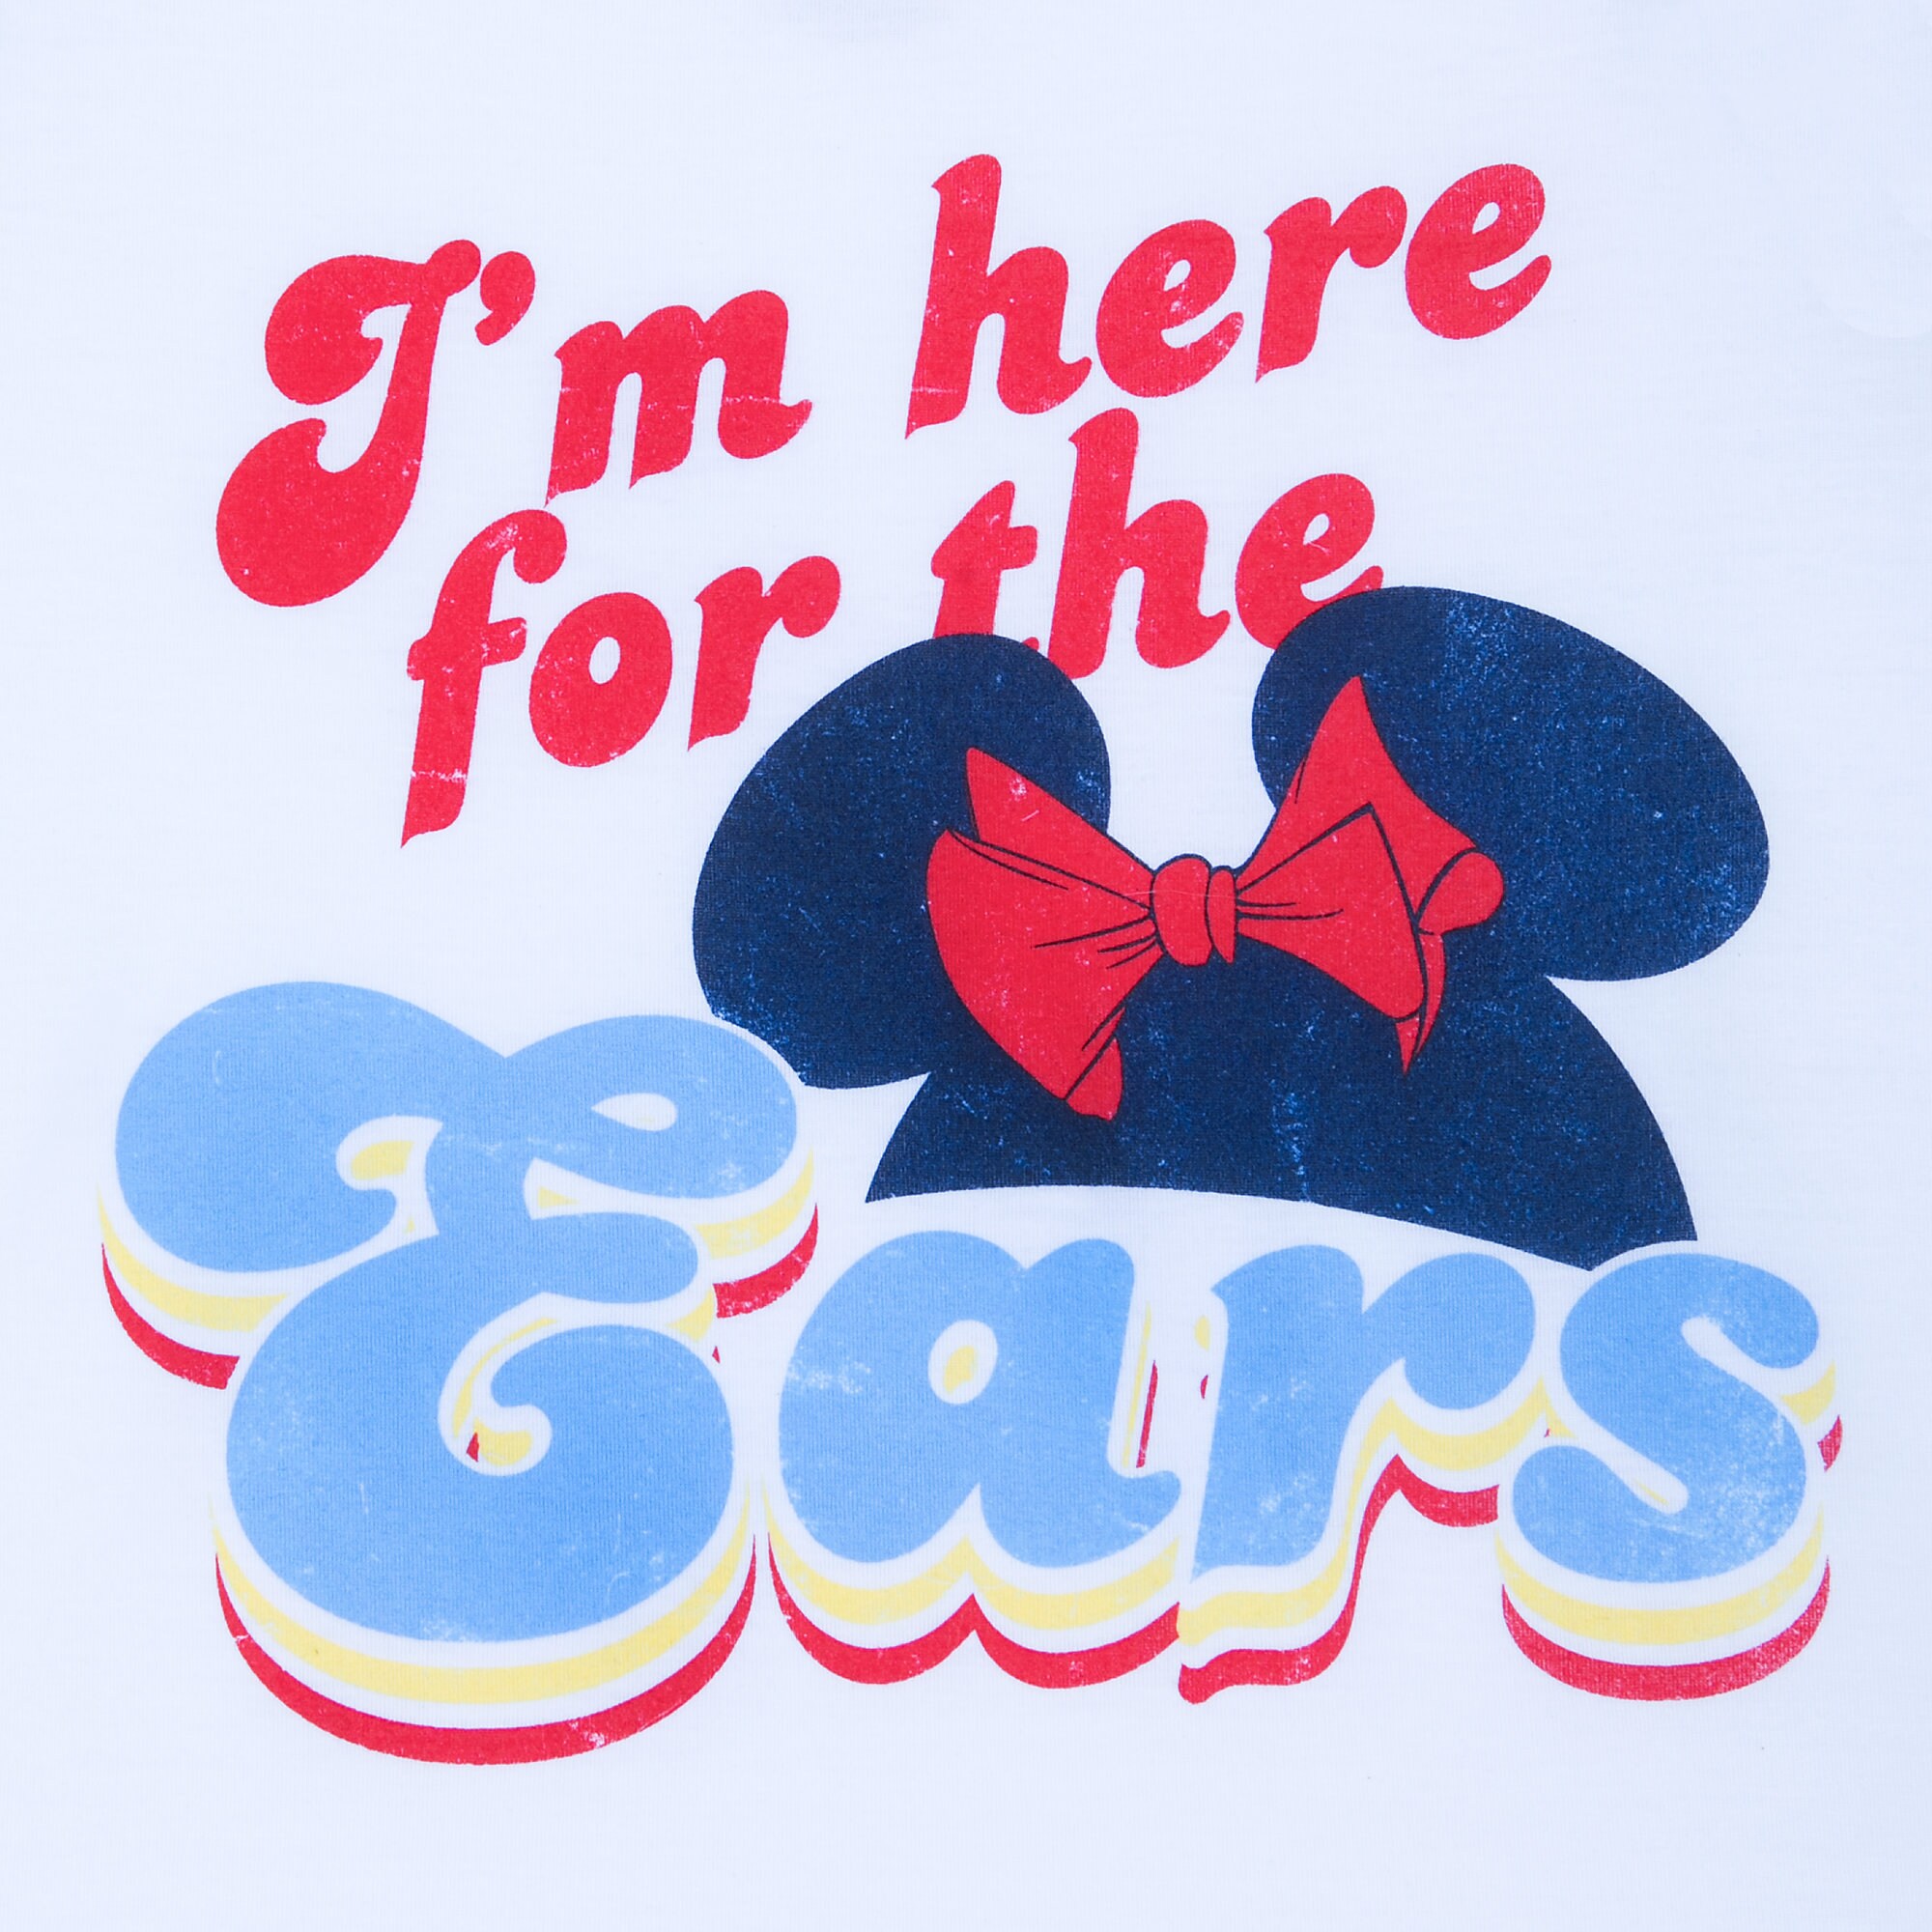 Minnie Mouse ''I'm here for the Ears'' Football T-Shirt for Women